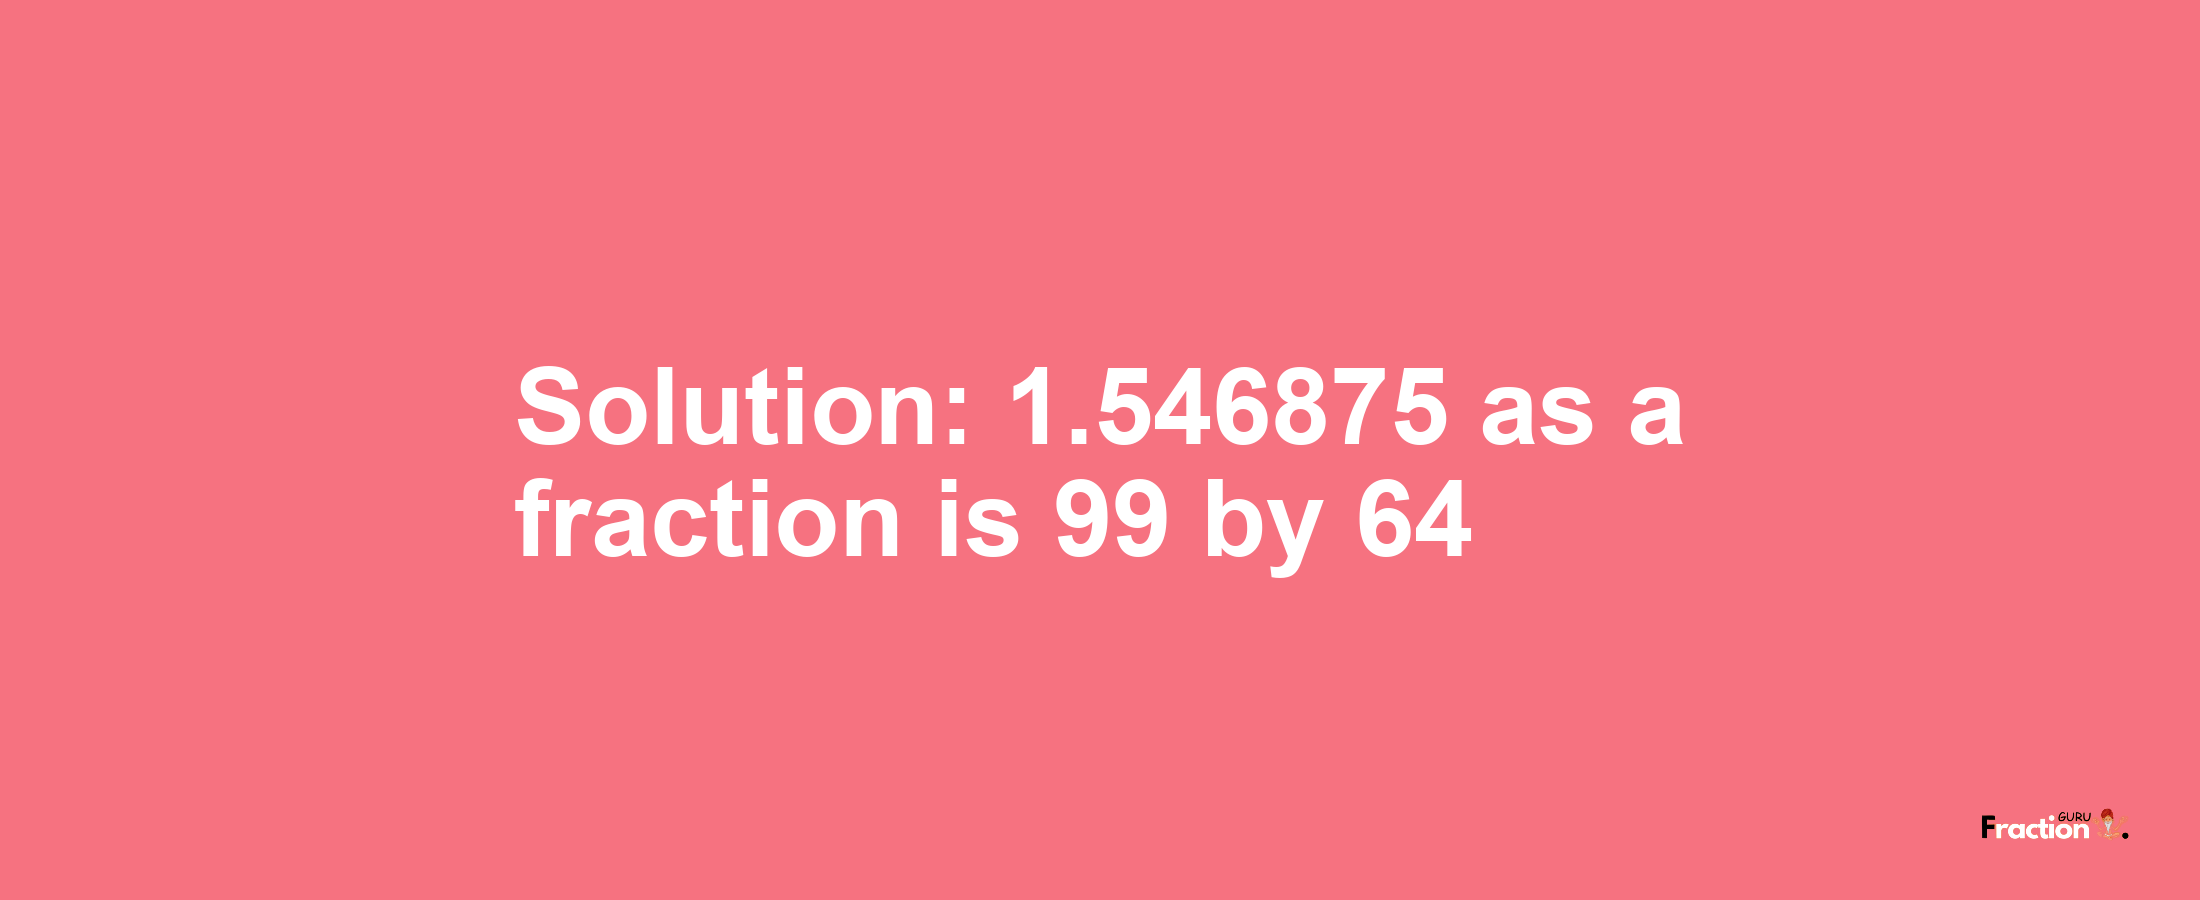 Solution:1.546875 as a fraction is 99/64